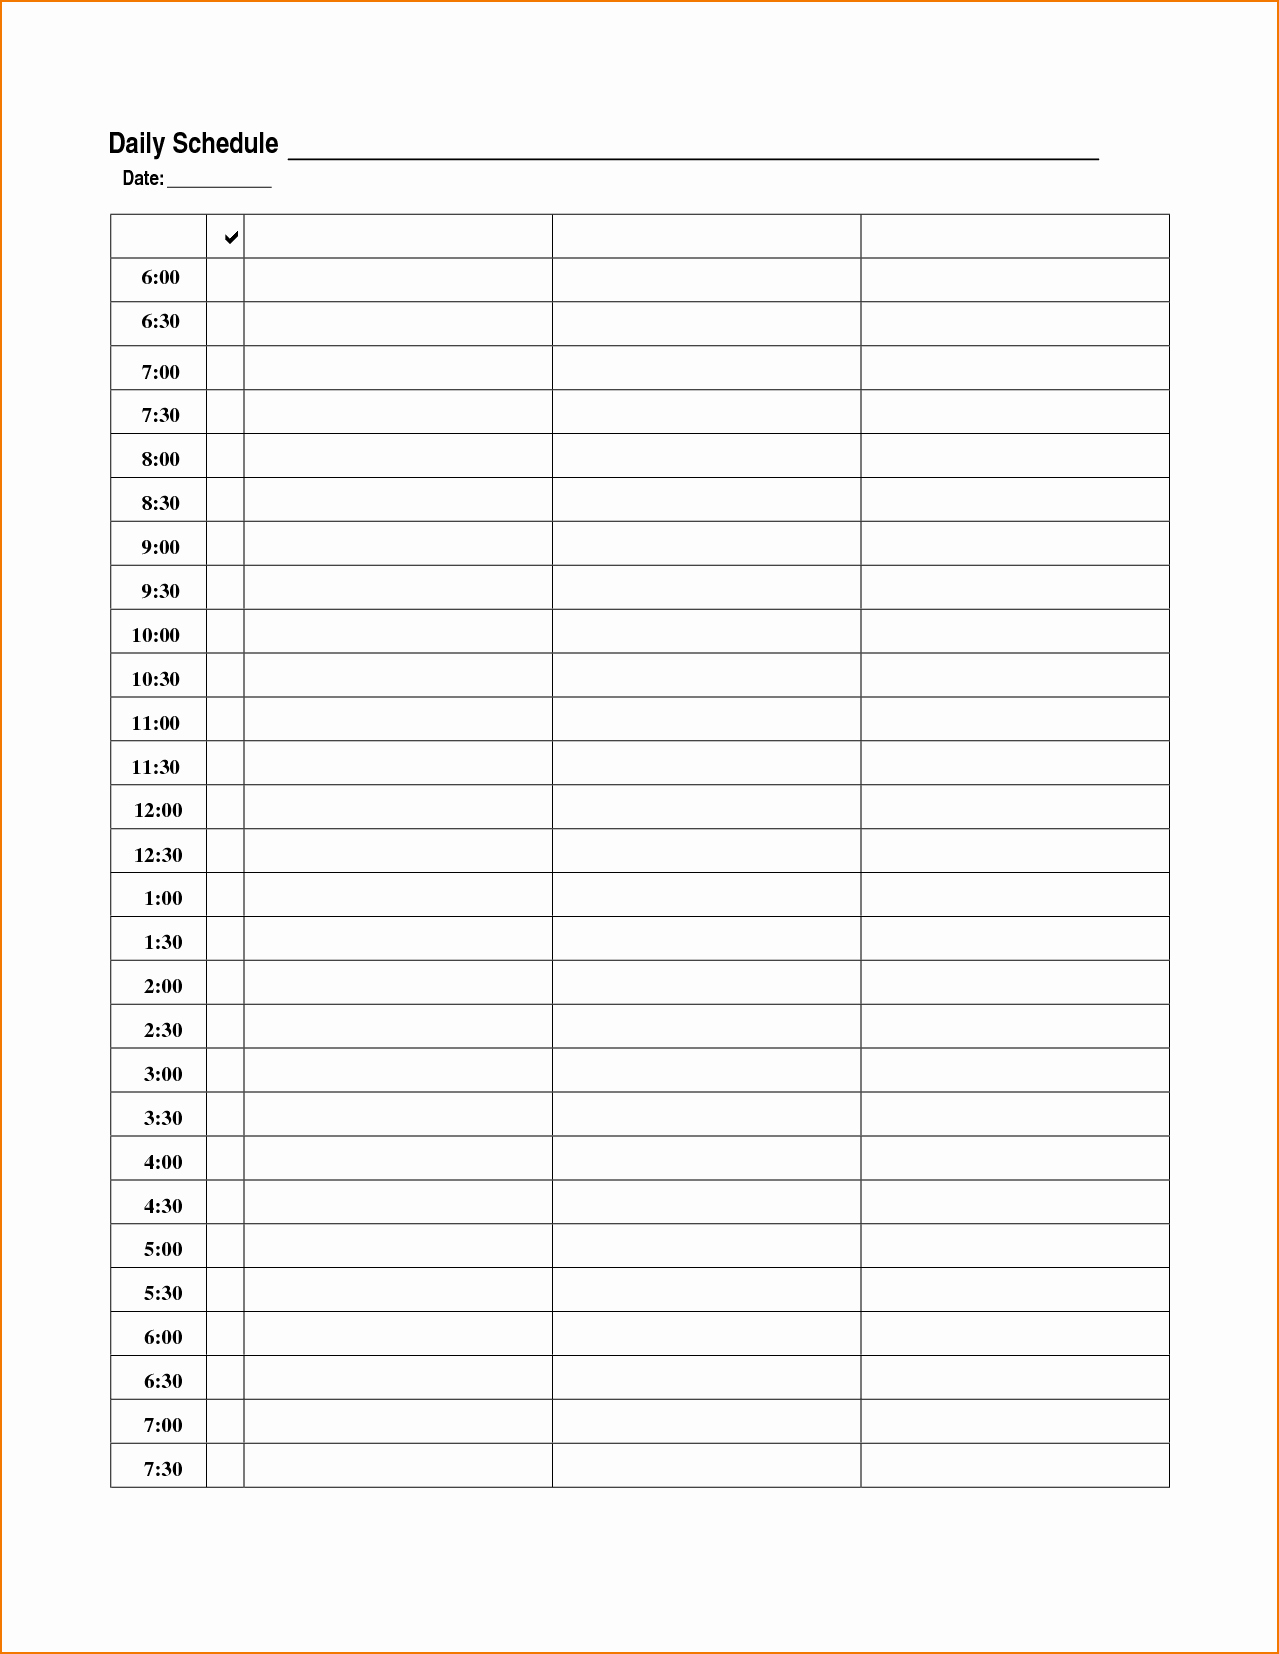 Weekly Schedule Template Pdf Unique 5 Daily Schedule Template Pdf